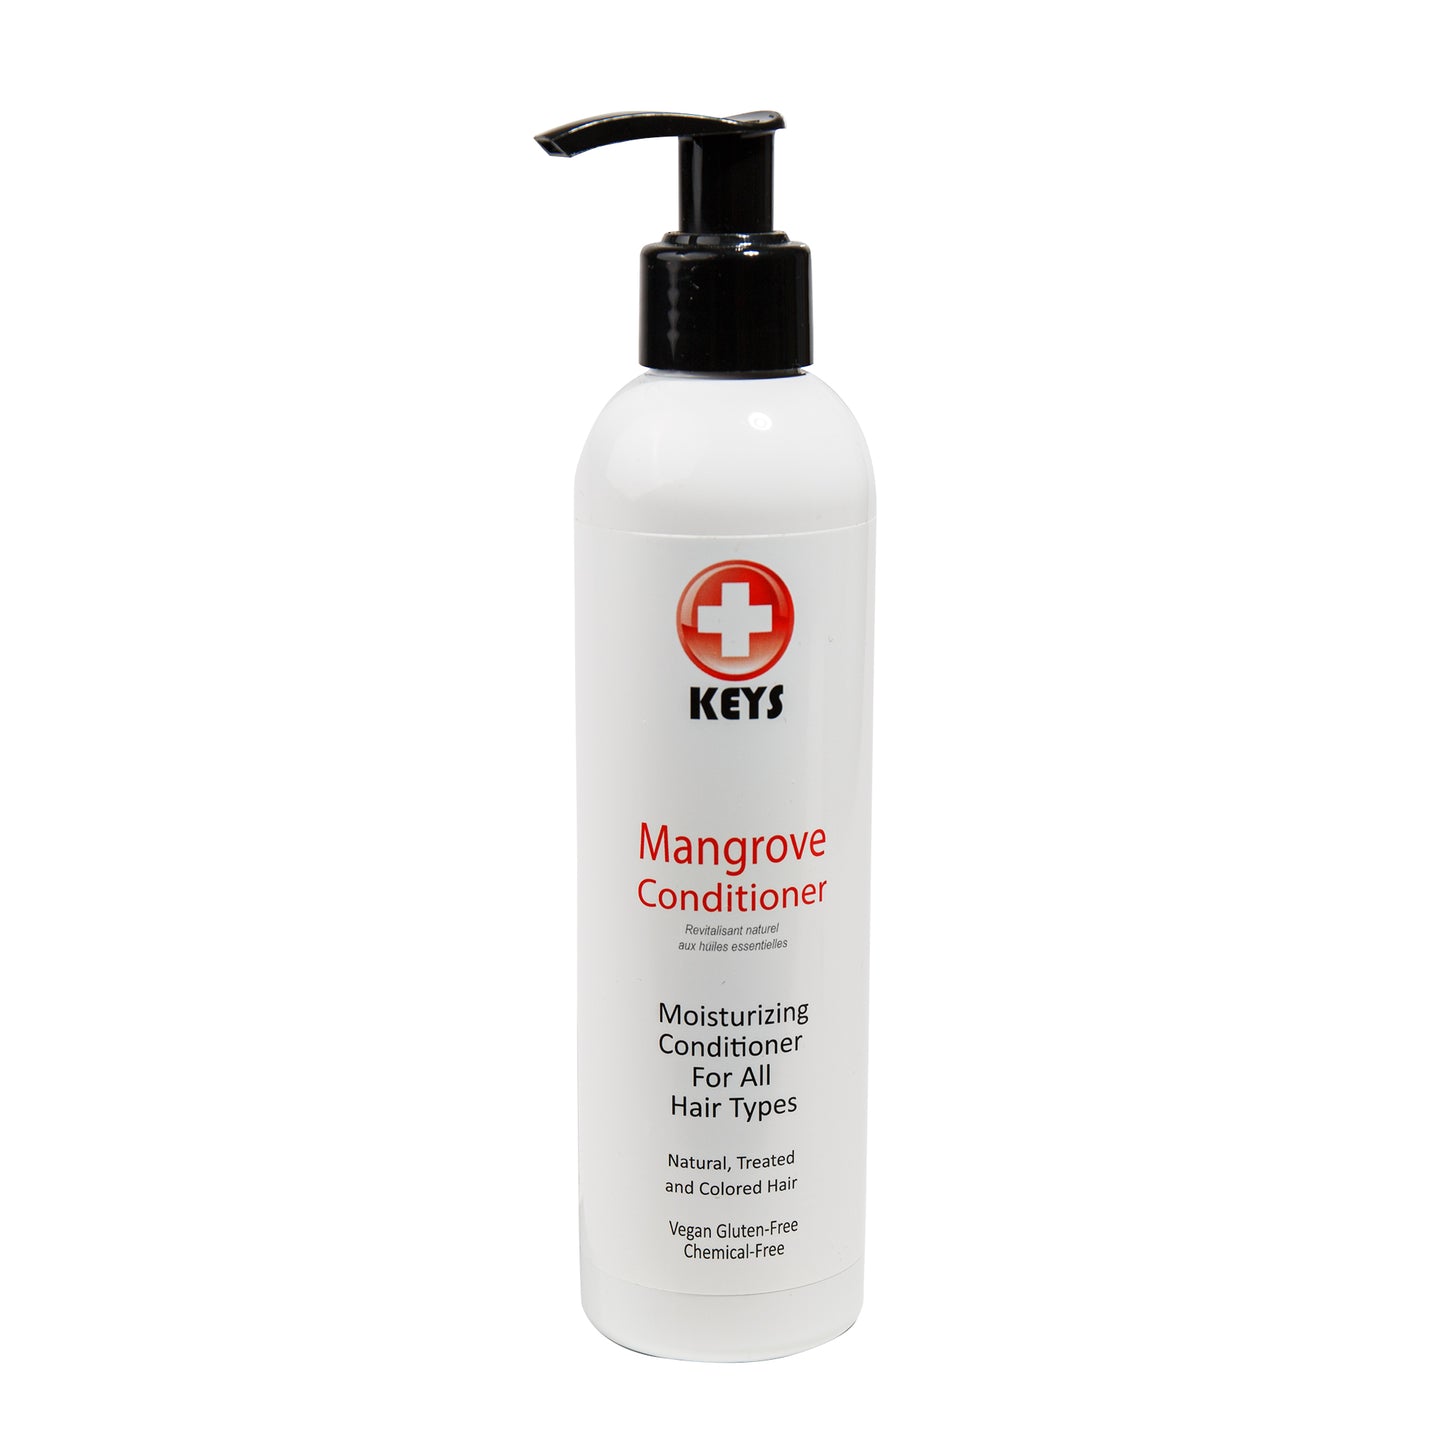 Primary image of Mangrove Hair Conditioner